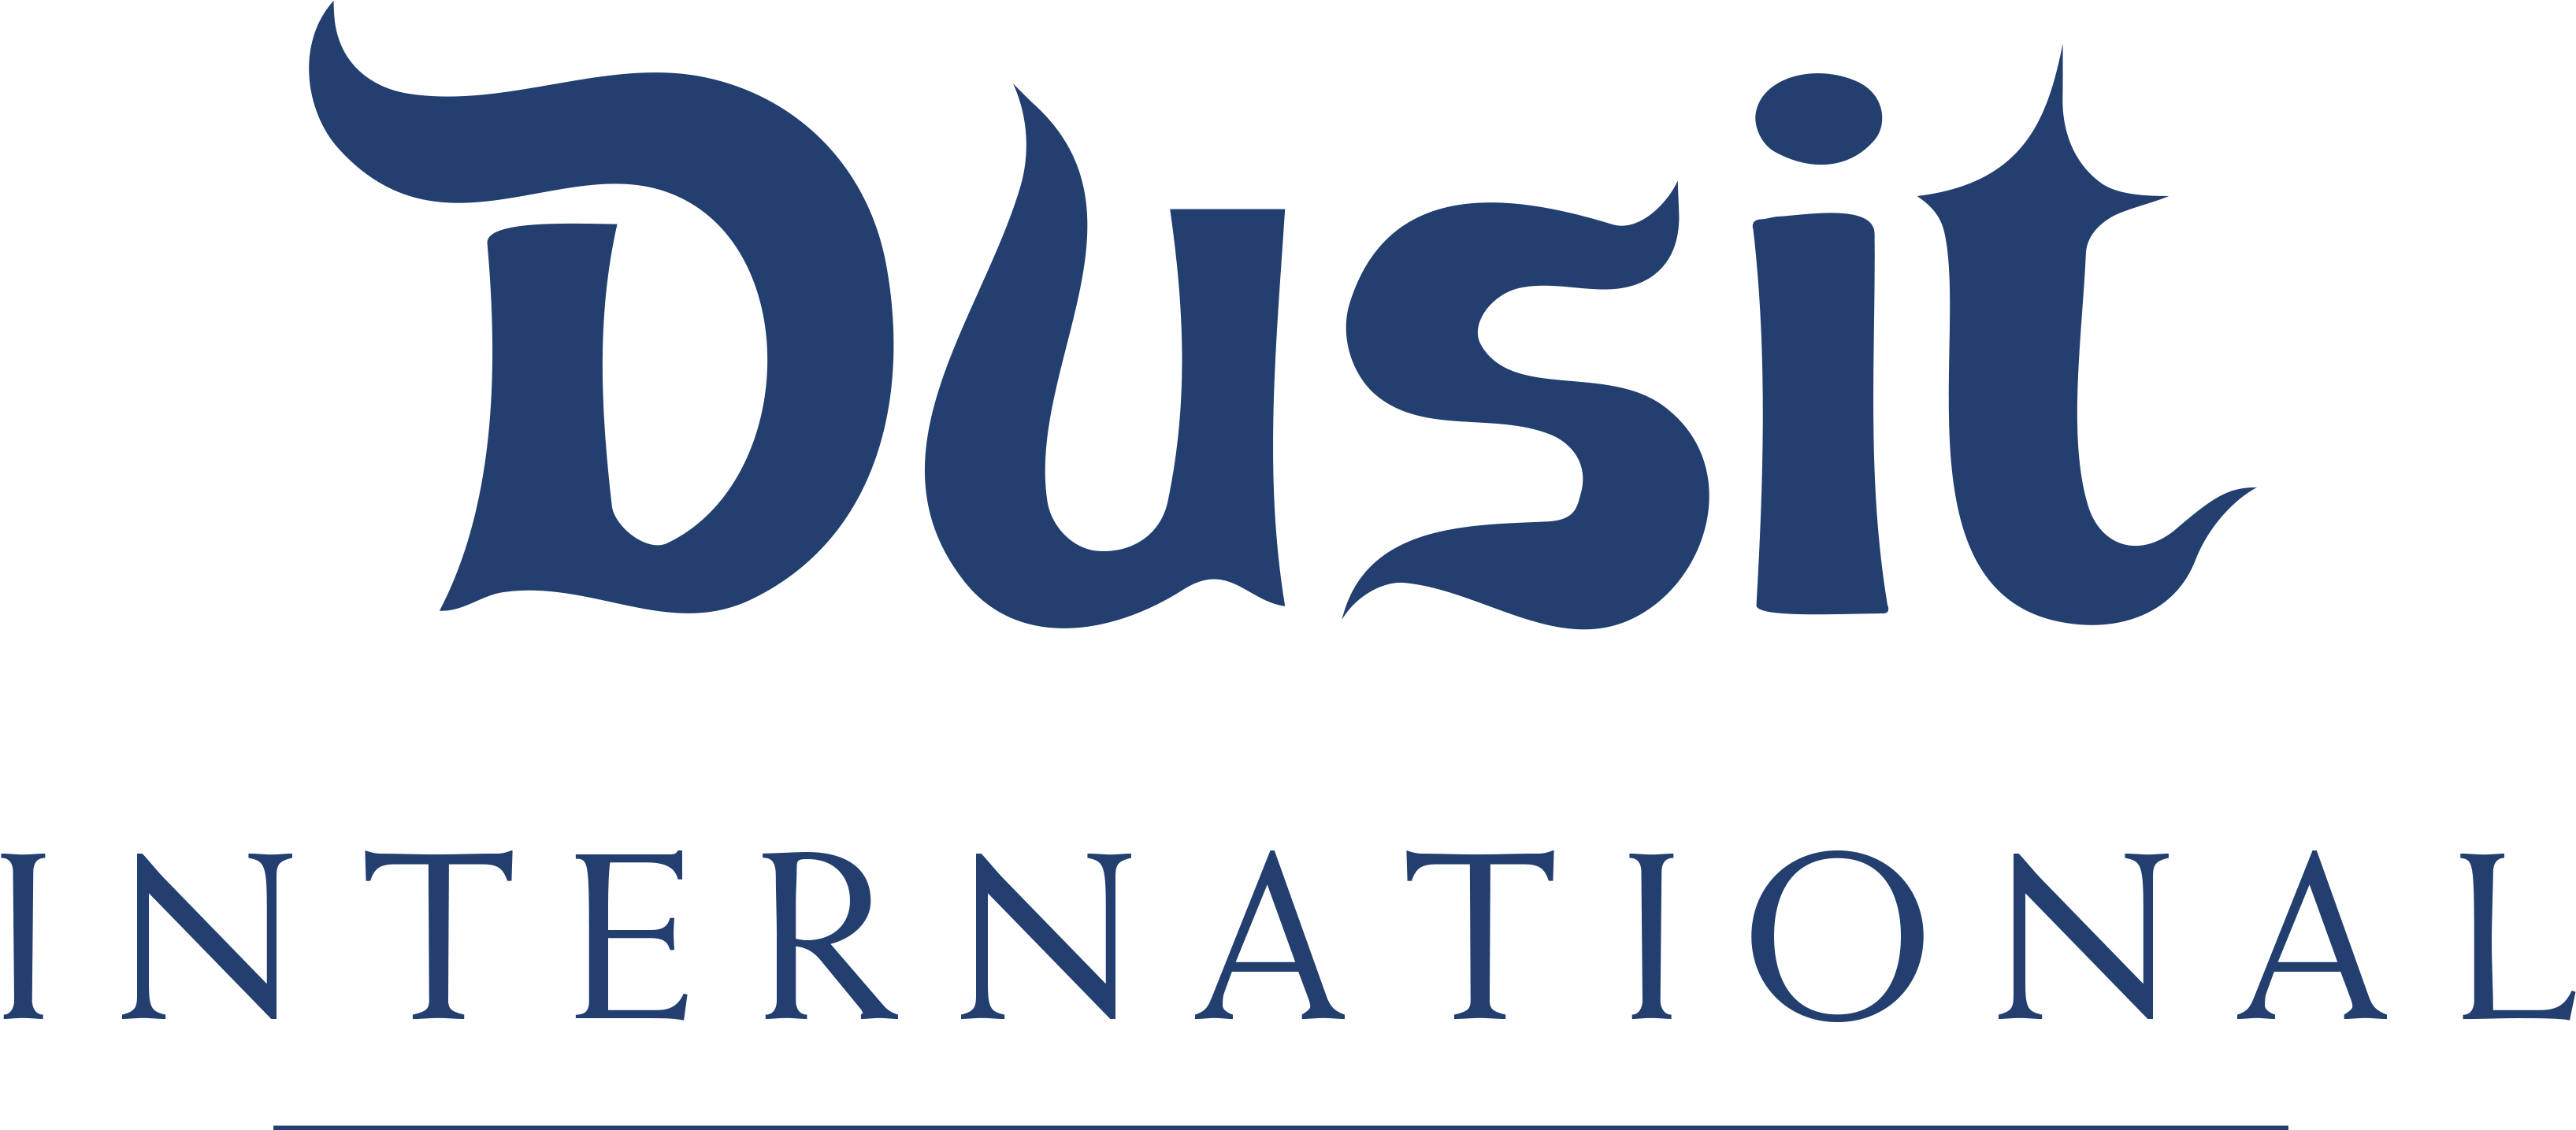 Download In 2014 Colours Signed A Mou With Dusit International A Dusit Thani Maldives Logo Png Image With No Background Pngkey Com